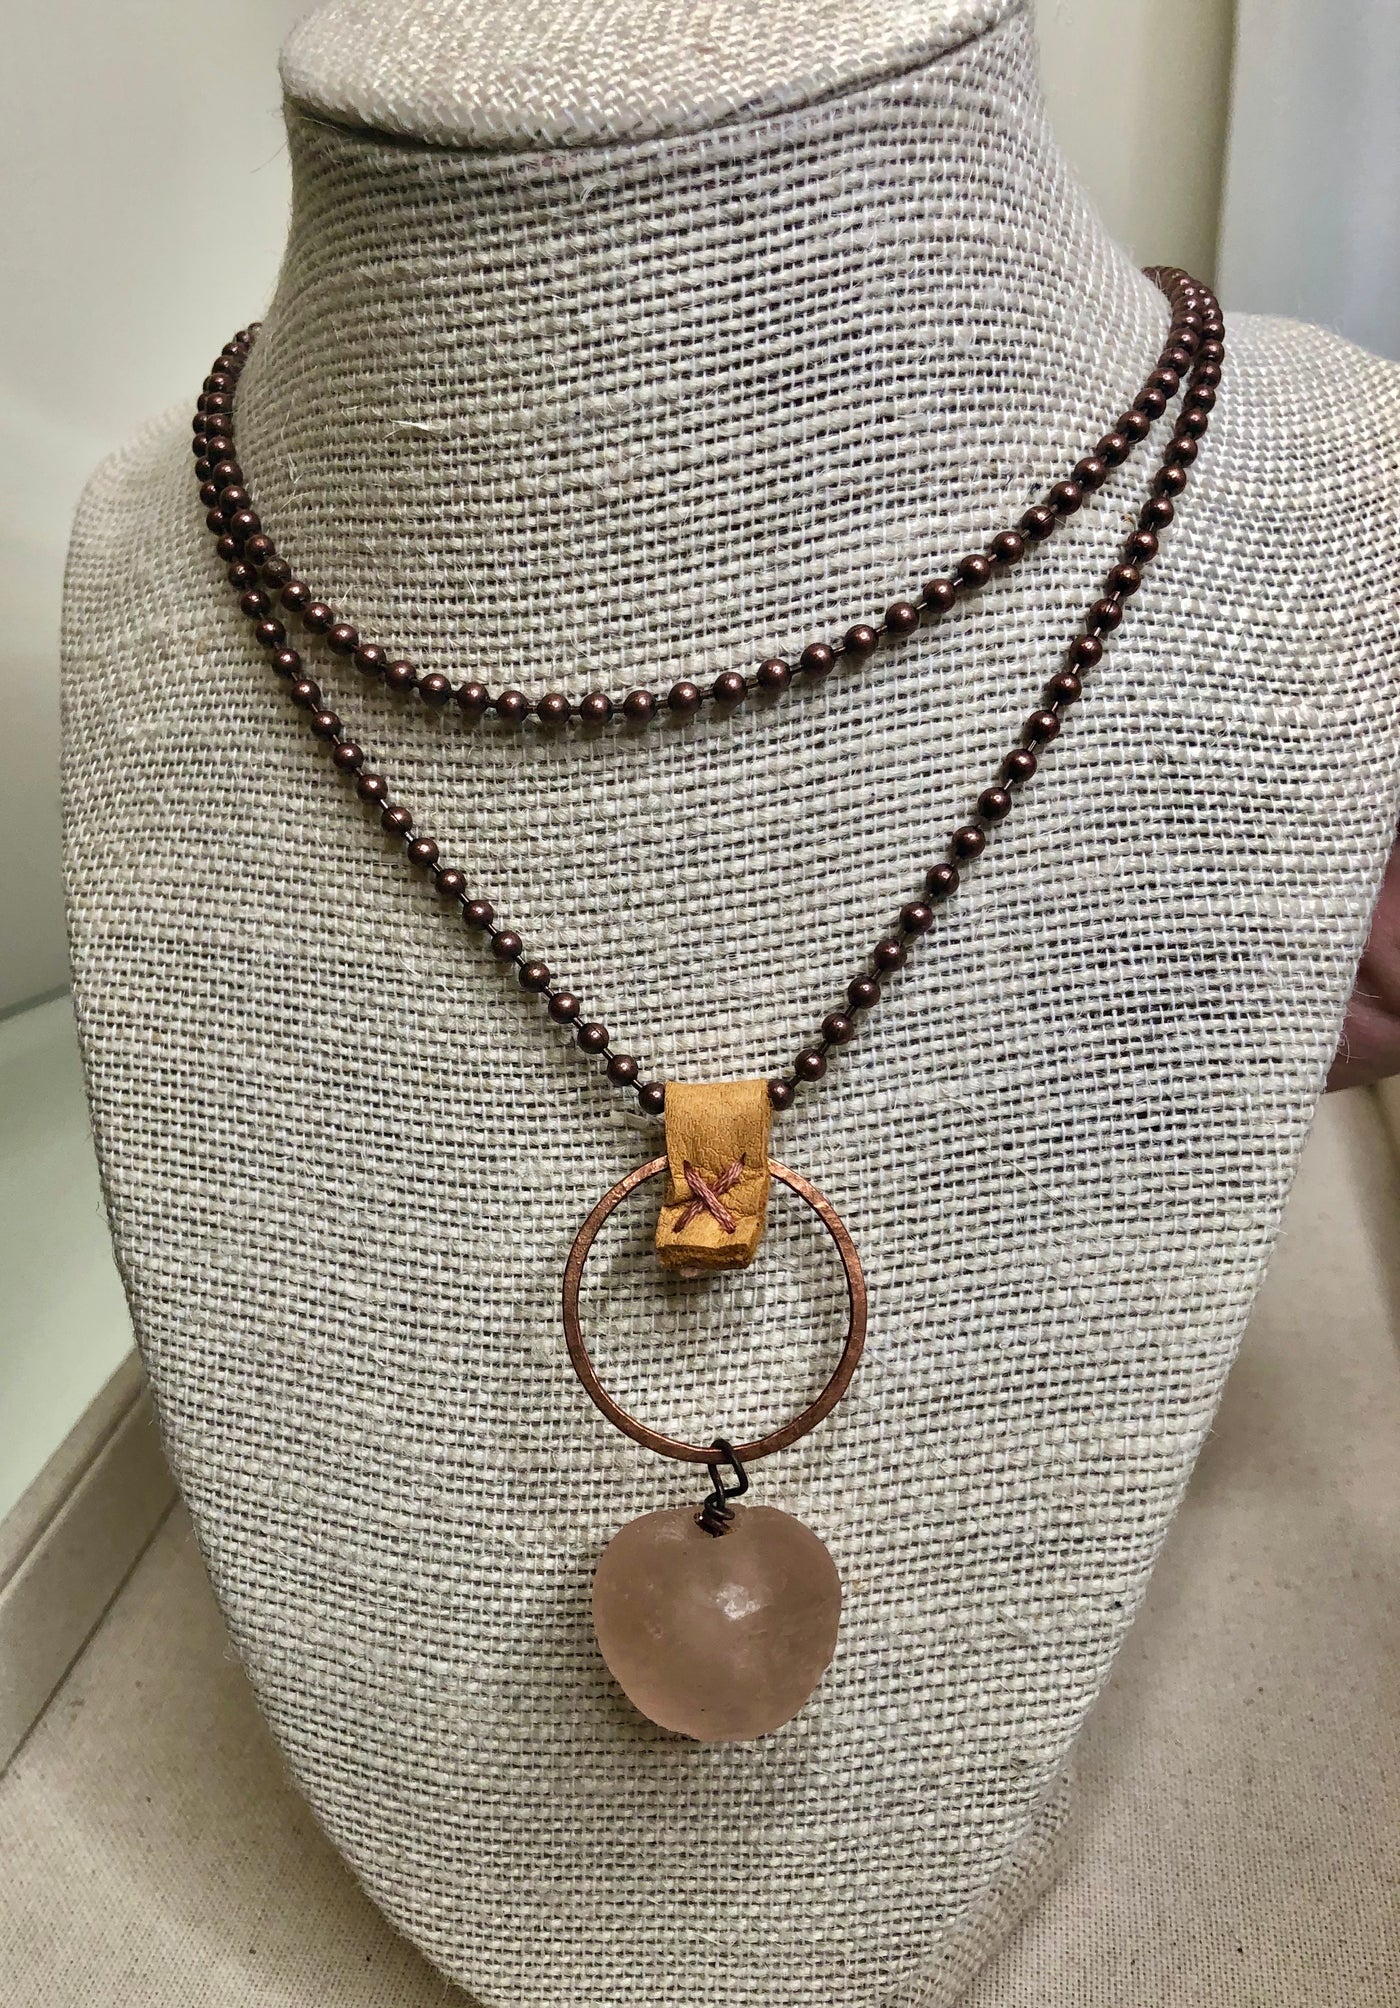 Beaded Bronze Necklace - Corinne an Affordable Women's Clothing Boutique in the US USA